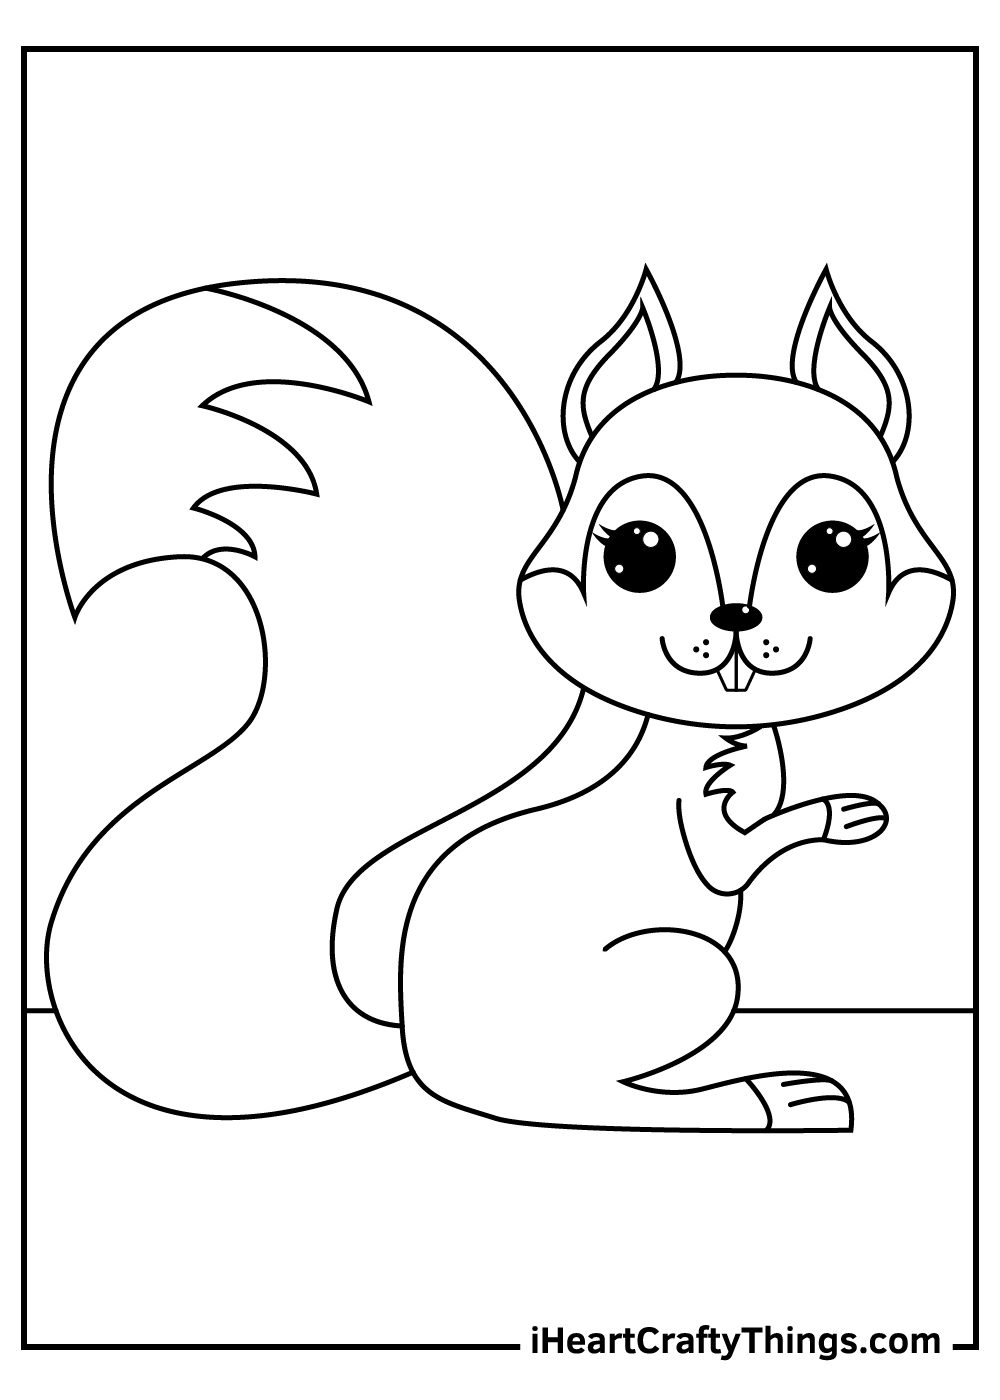 Squirrels Coloring Pages (100% Free Printables) - Free Printable Squirrel Pictures